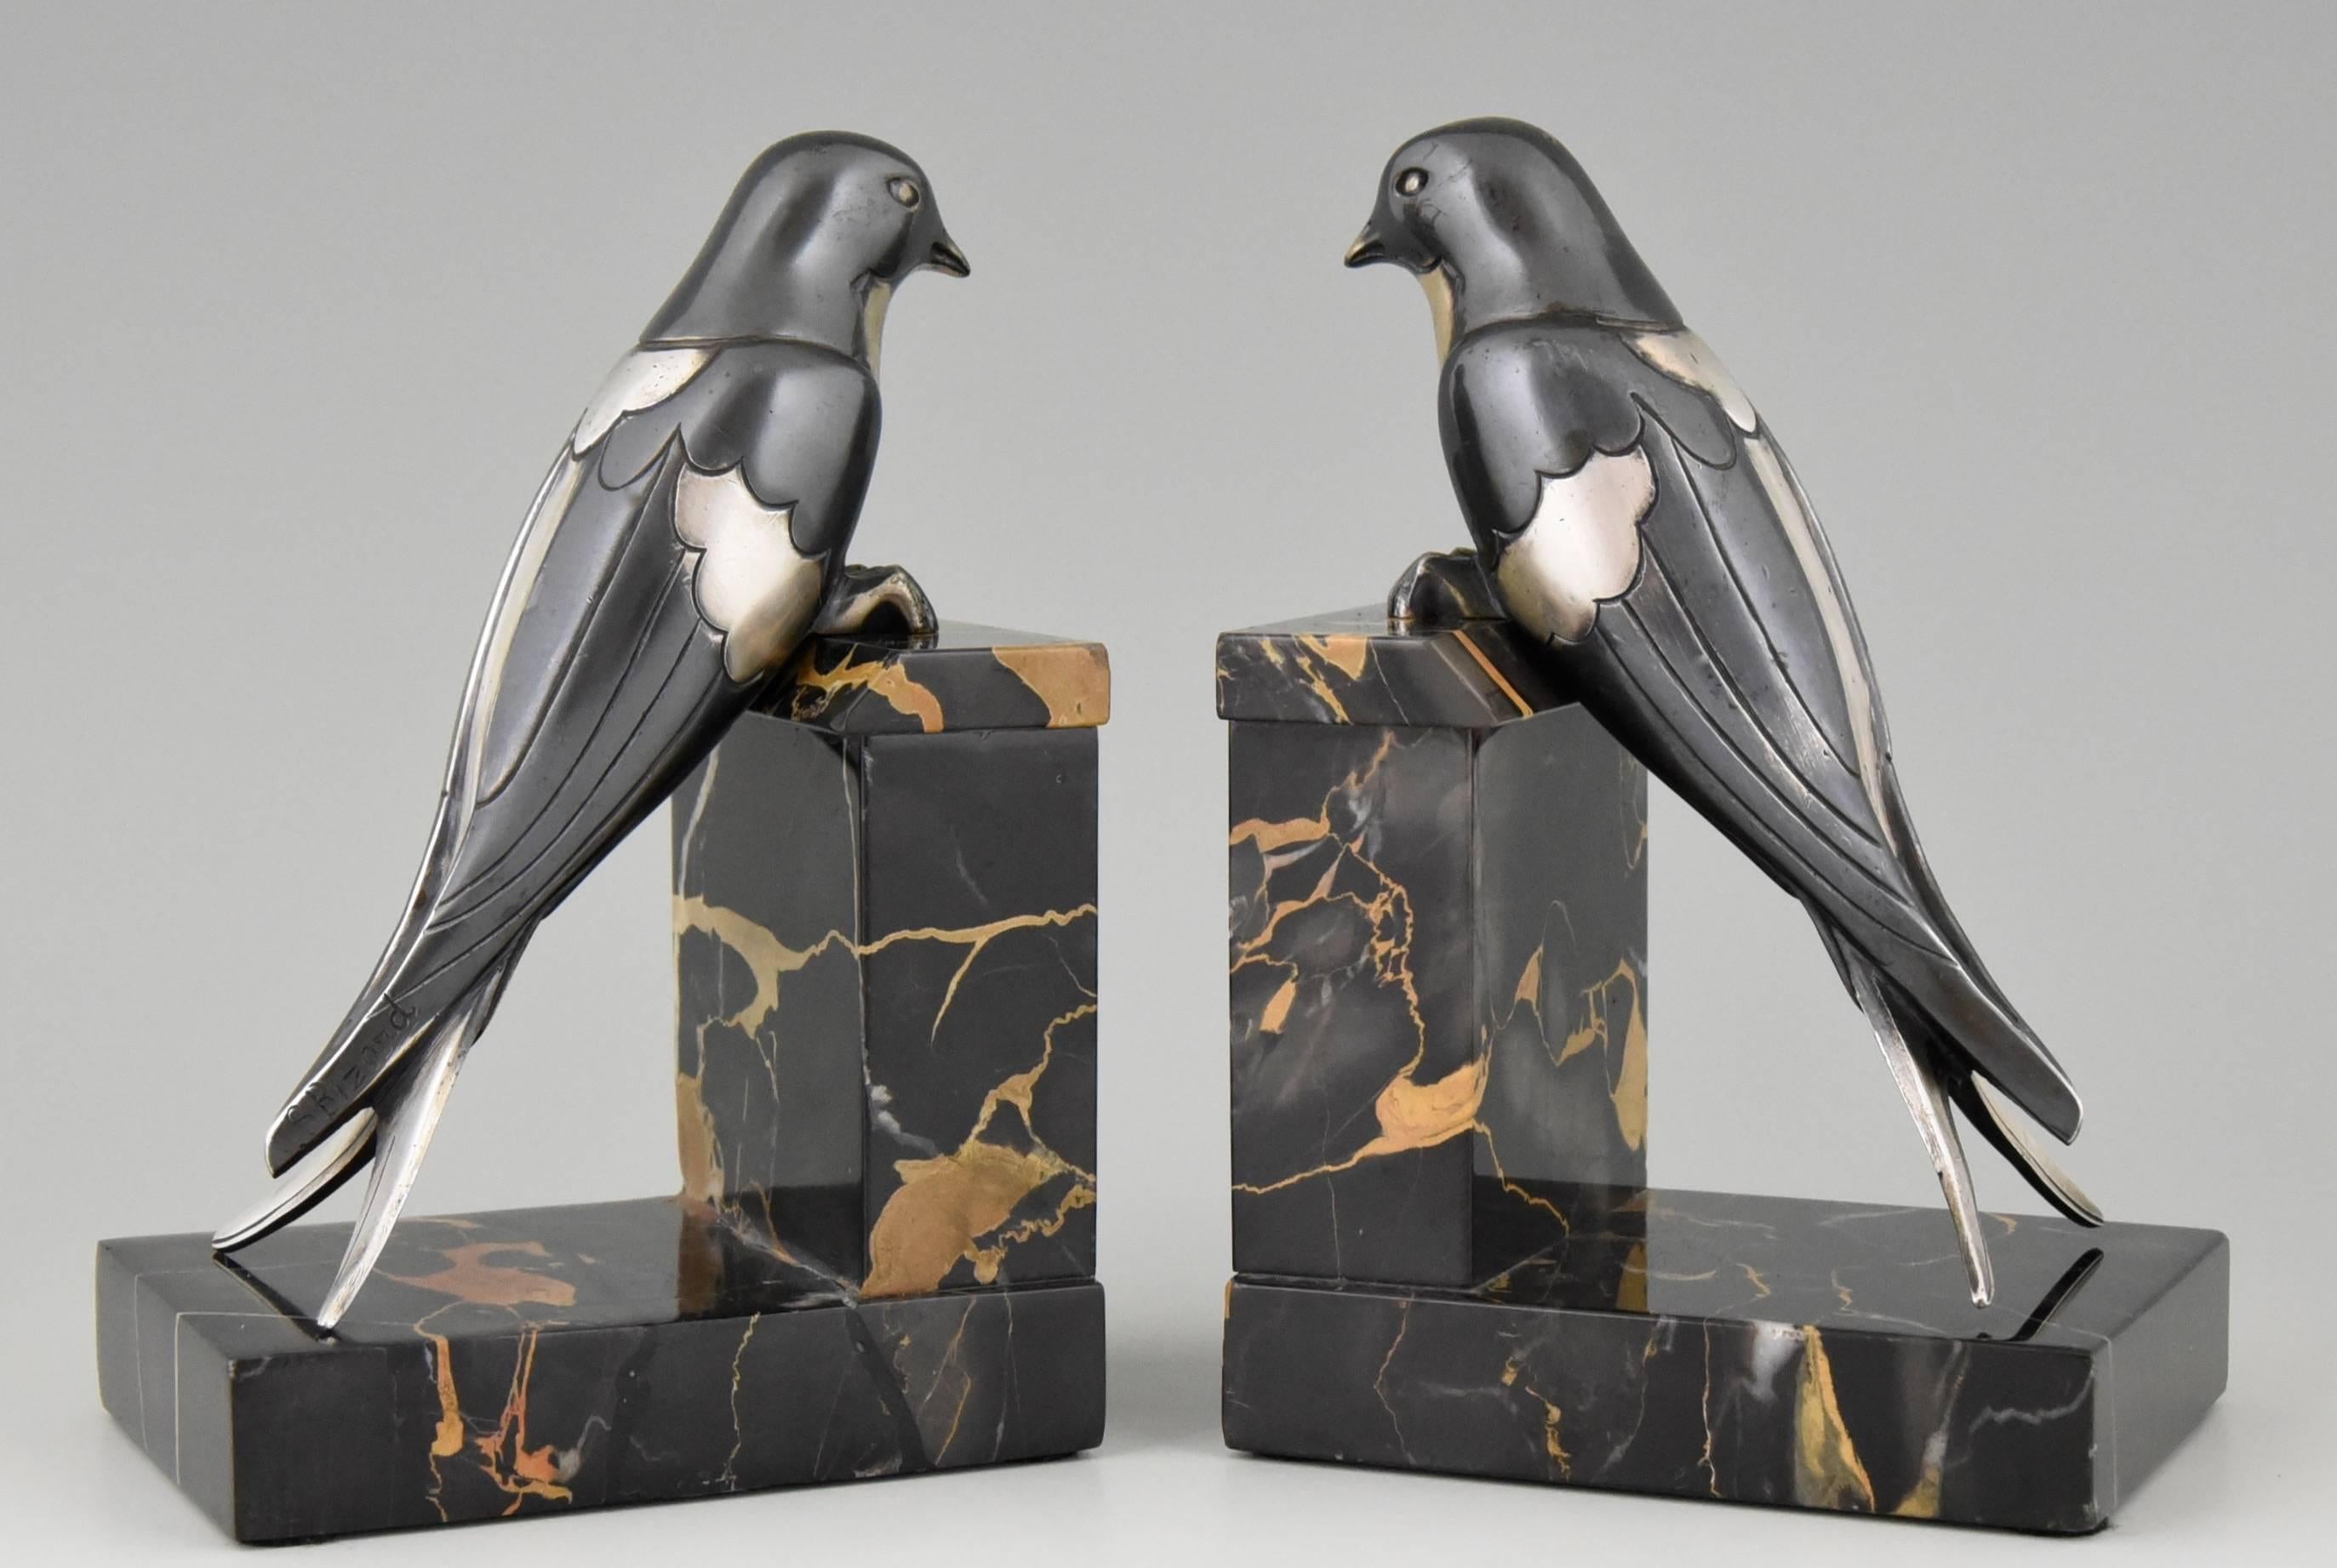 Description: Art Deco bronze swallow bookends. Artist / Maker: Suzanne Bizard. Signature / Marks: S. Bizard. Style: Art Deco. Date: 1930. Material: Silvered and blackened silvered bronze. Portor marble bases. Origin: France. Size of one: H 15.5 cm.